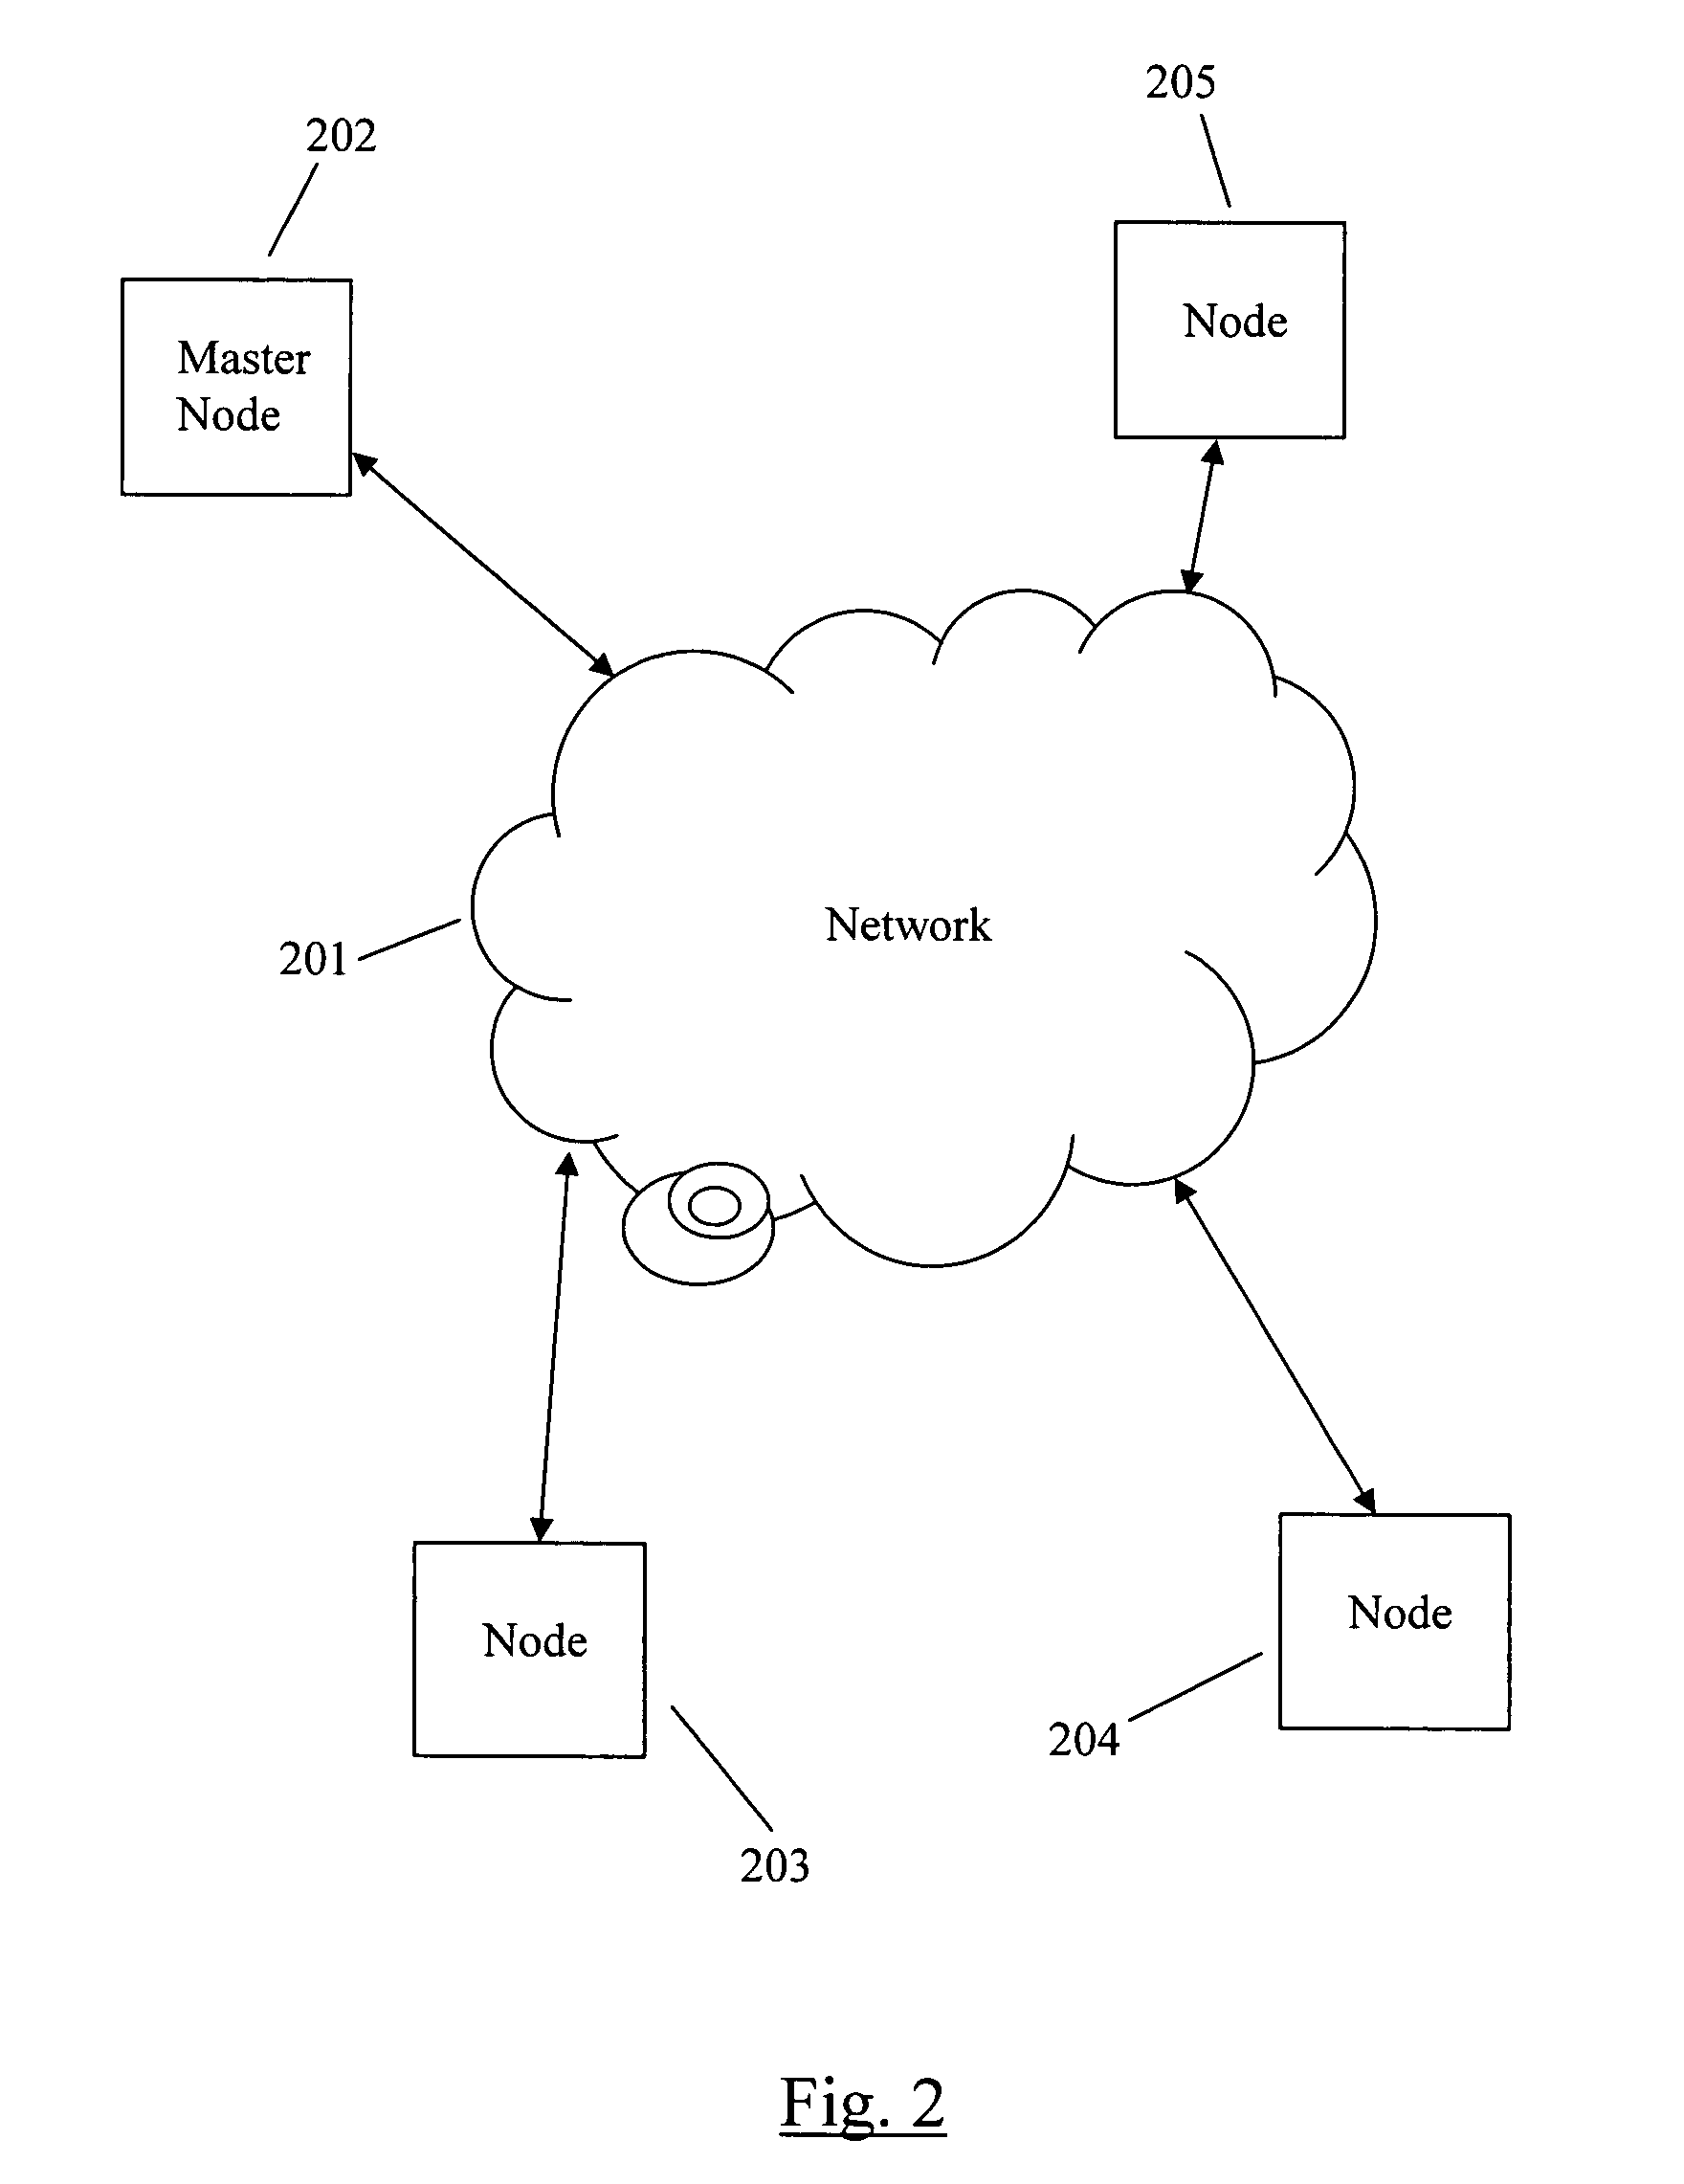 Dynamic installation and activation of software packages in a distributed networking device